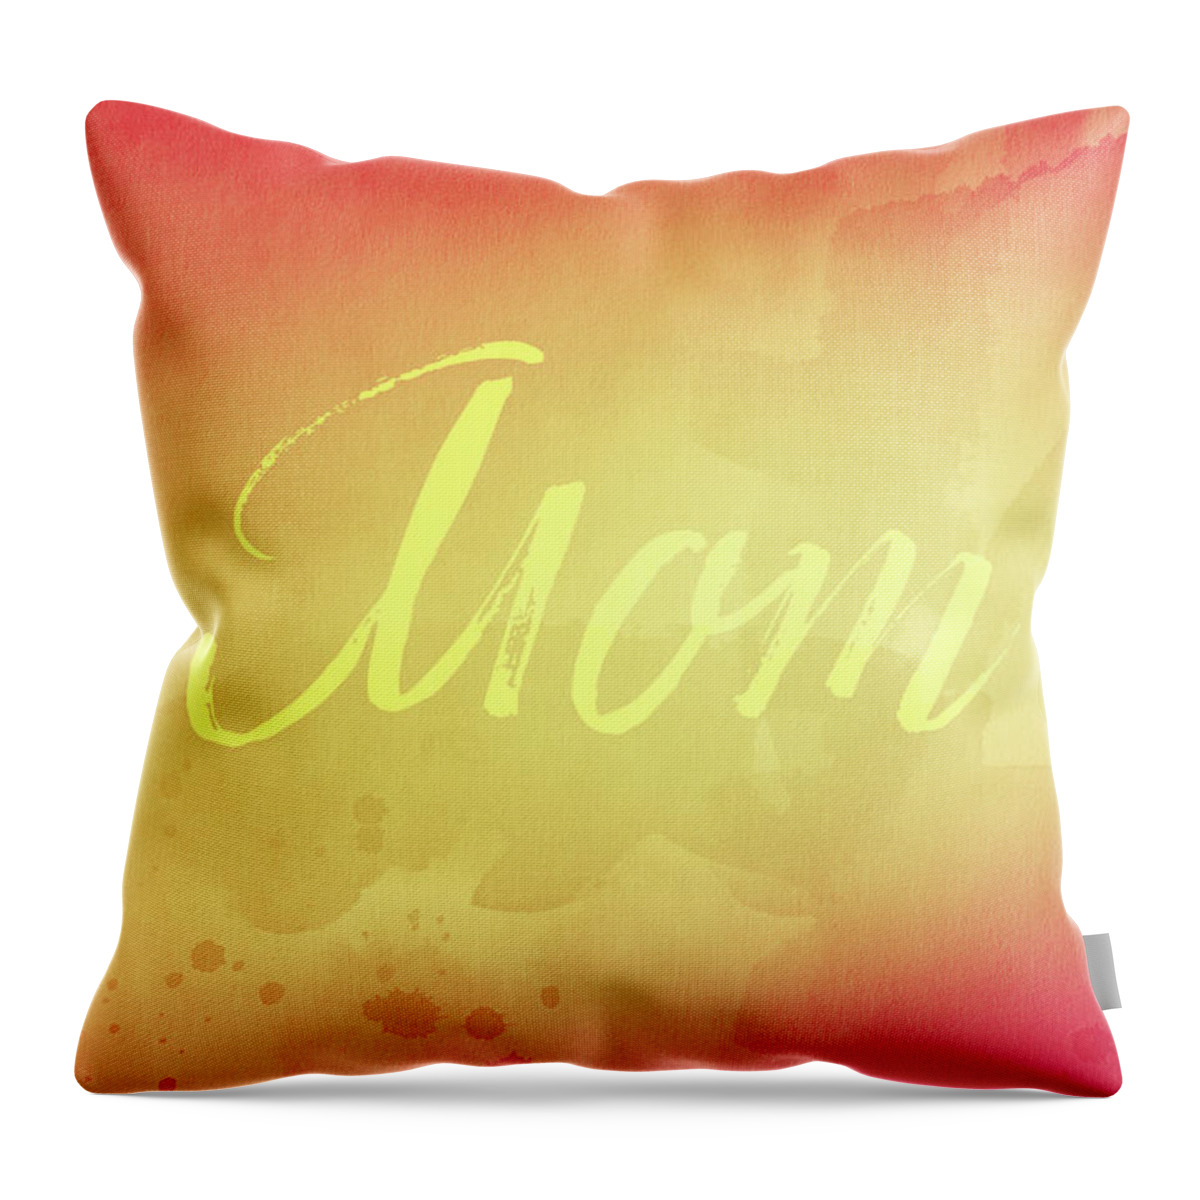 Watercolor Throw Pillow featuring the digital art Watercolor Art Mom 2 by Amelia Pearn